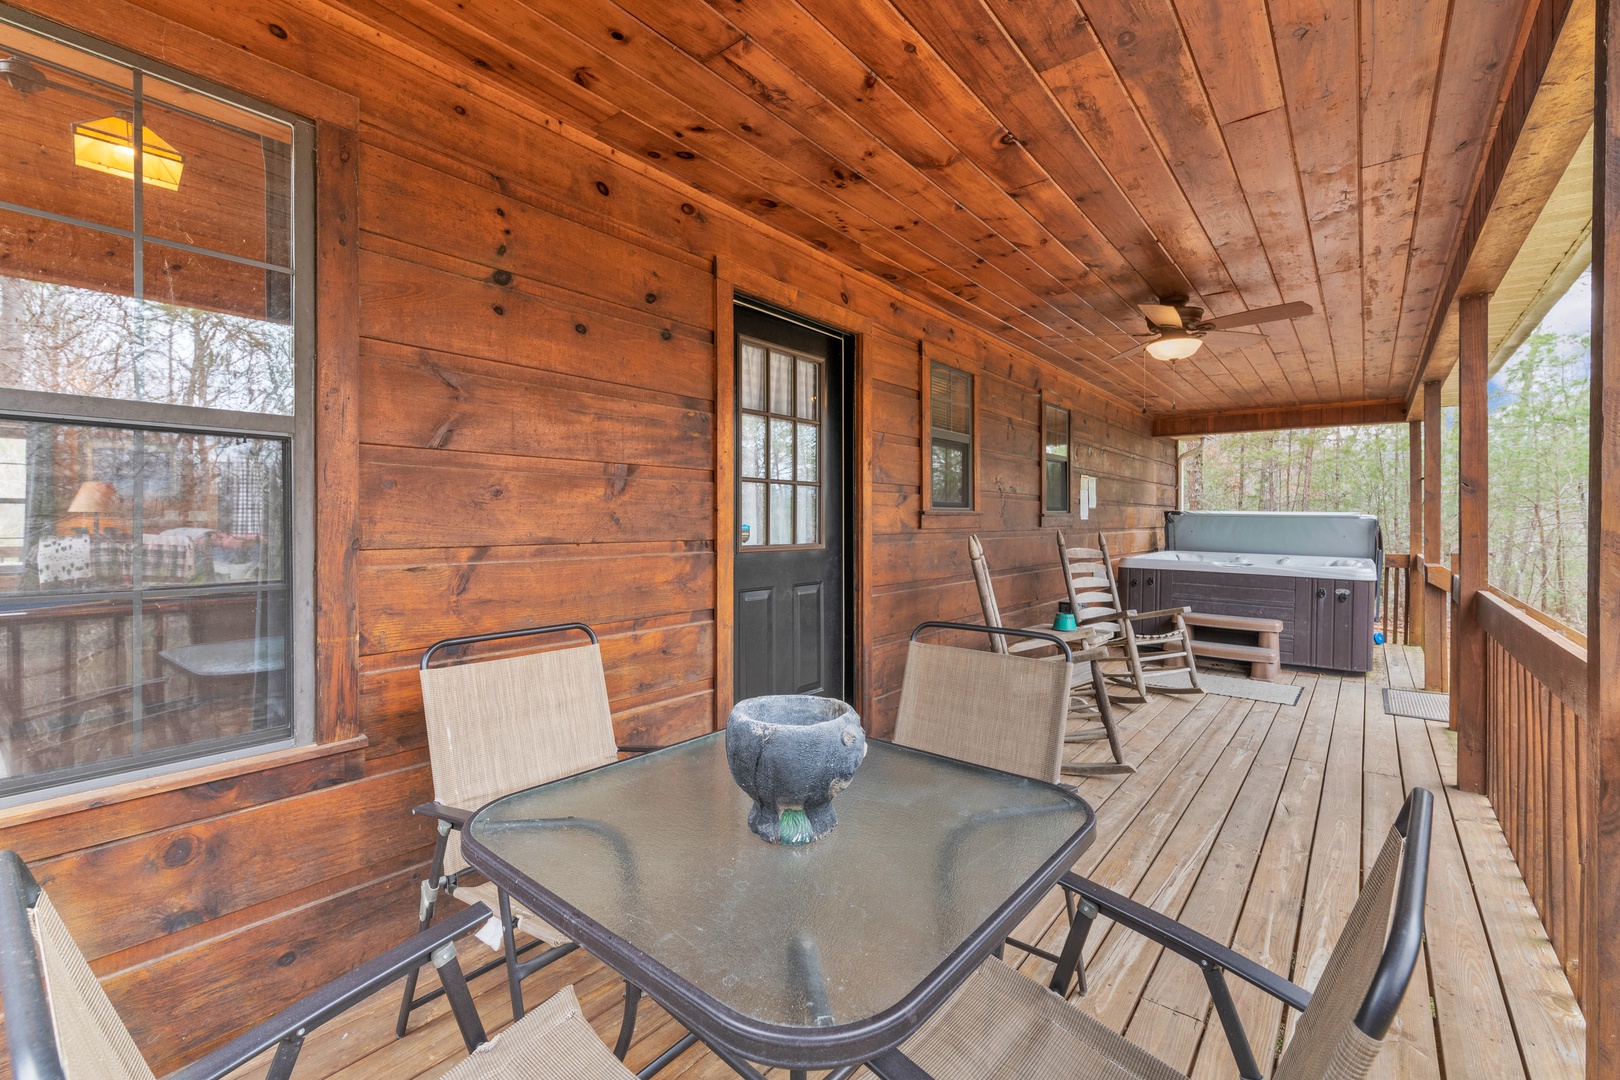 Lounge & dine in the fresh air with gorgeous nature views on the back deck